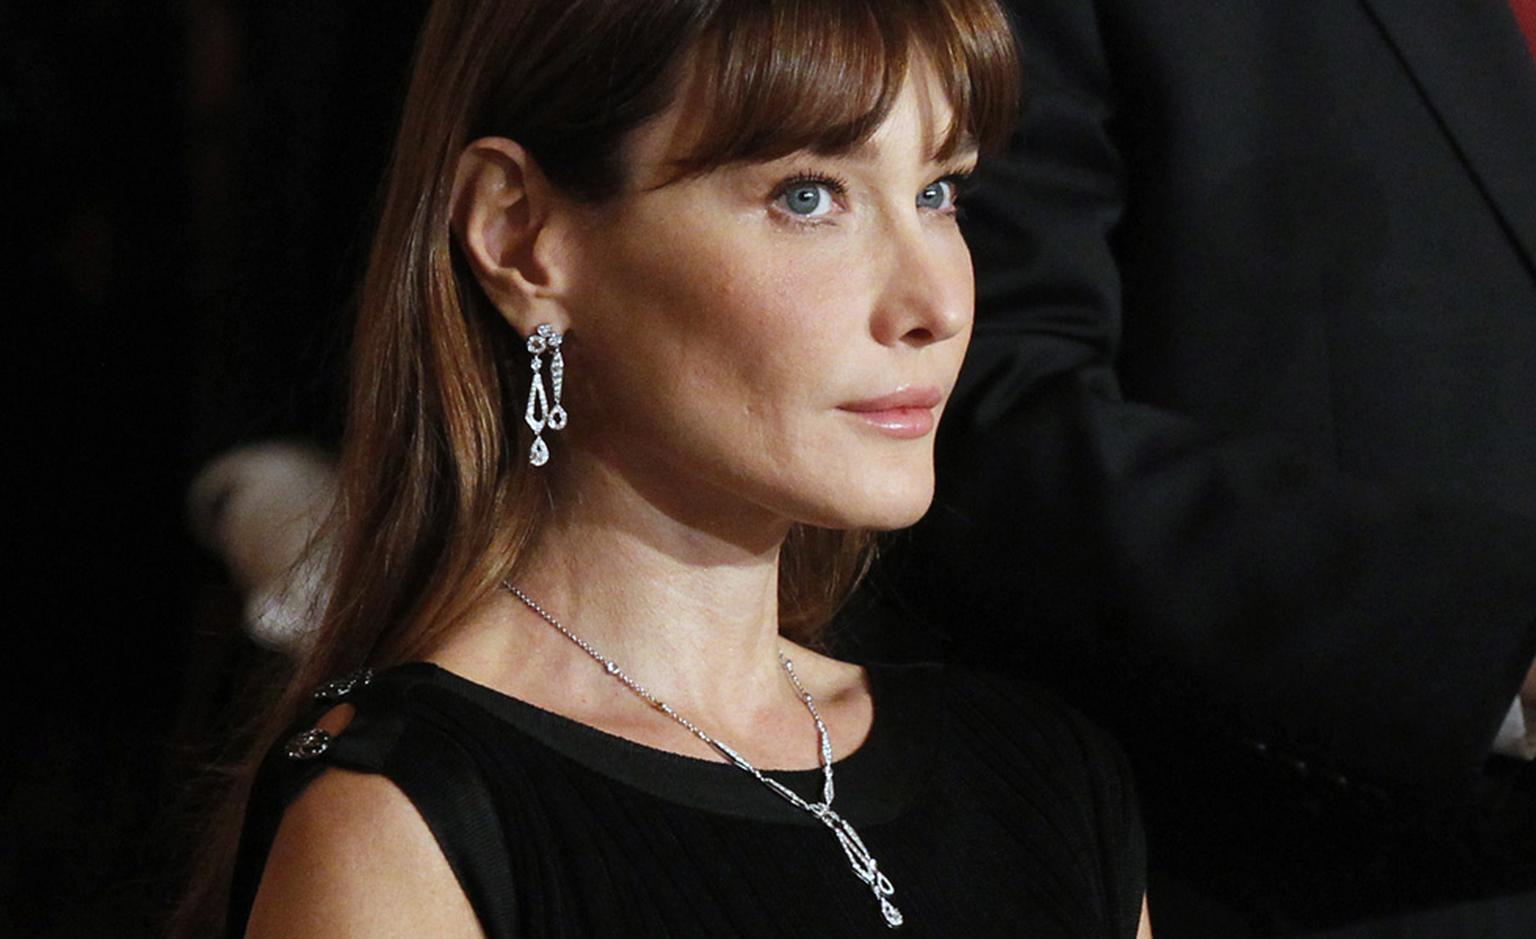 Carla Bruni-Sarkozy in Chaumet earrings and necklace